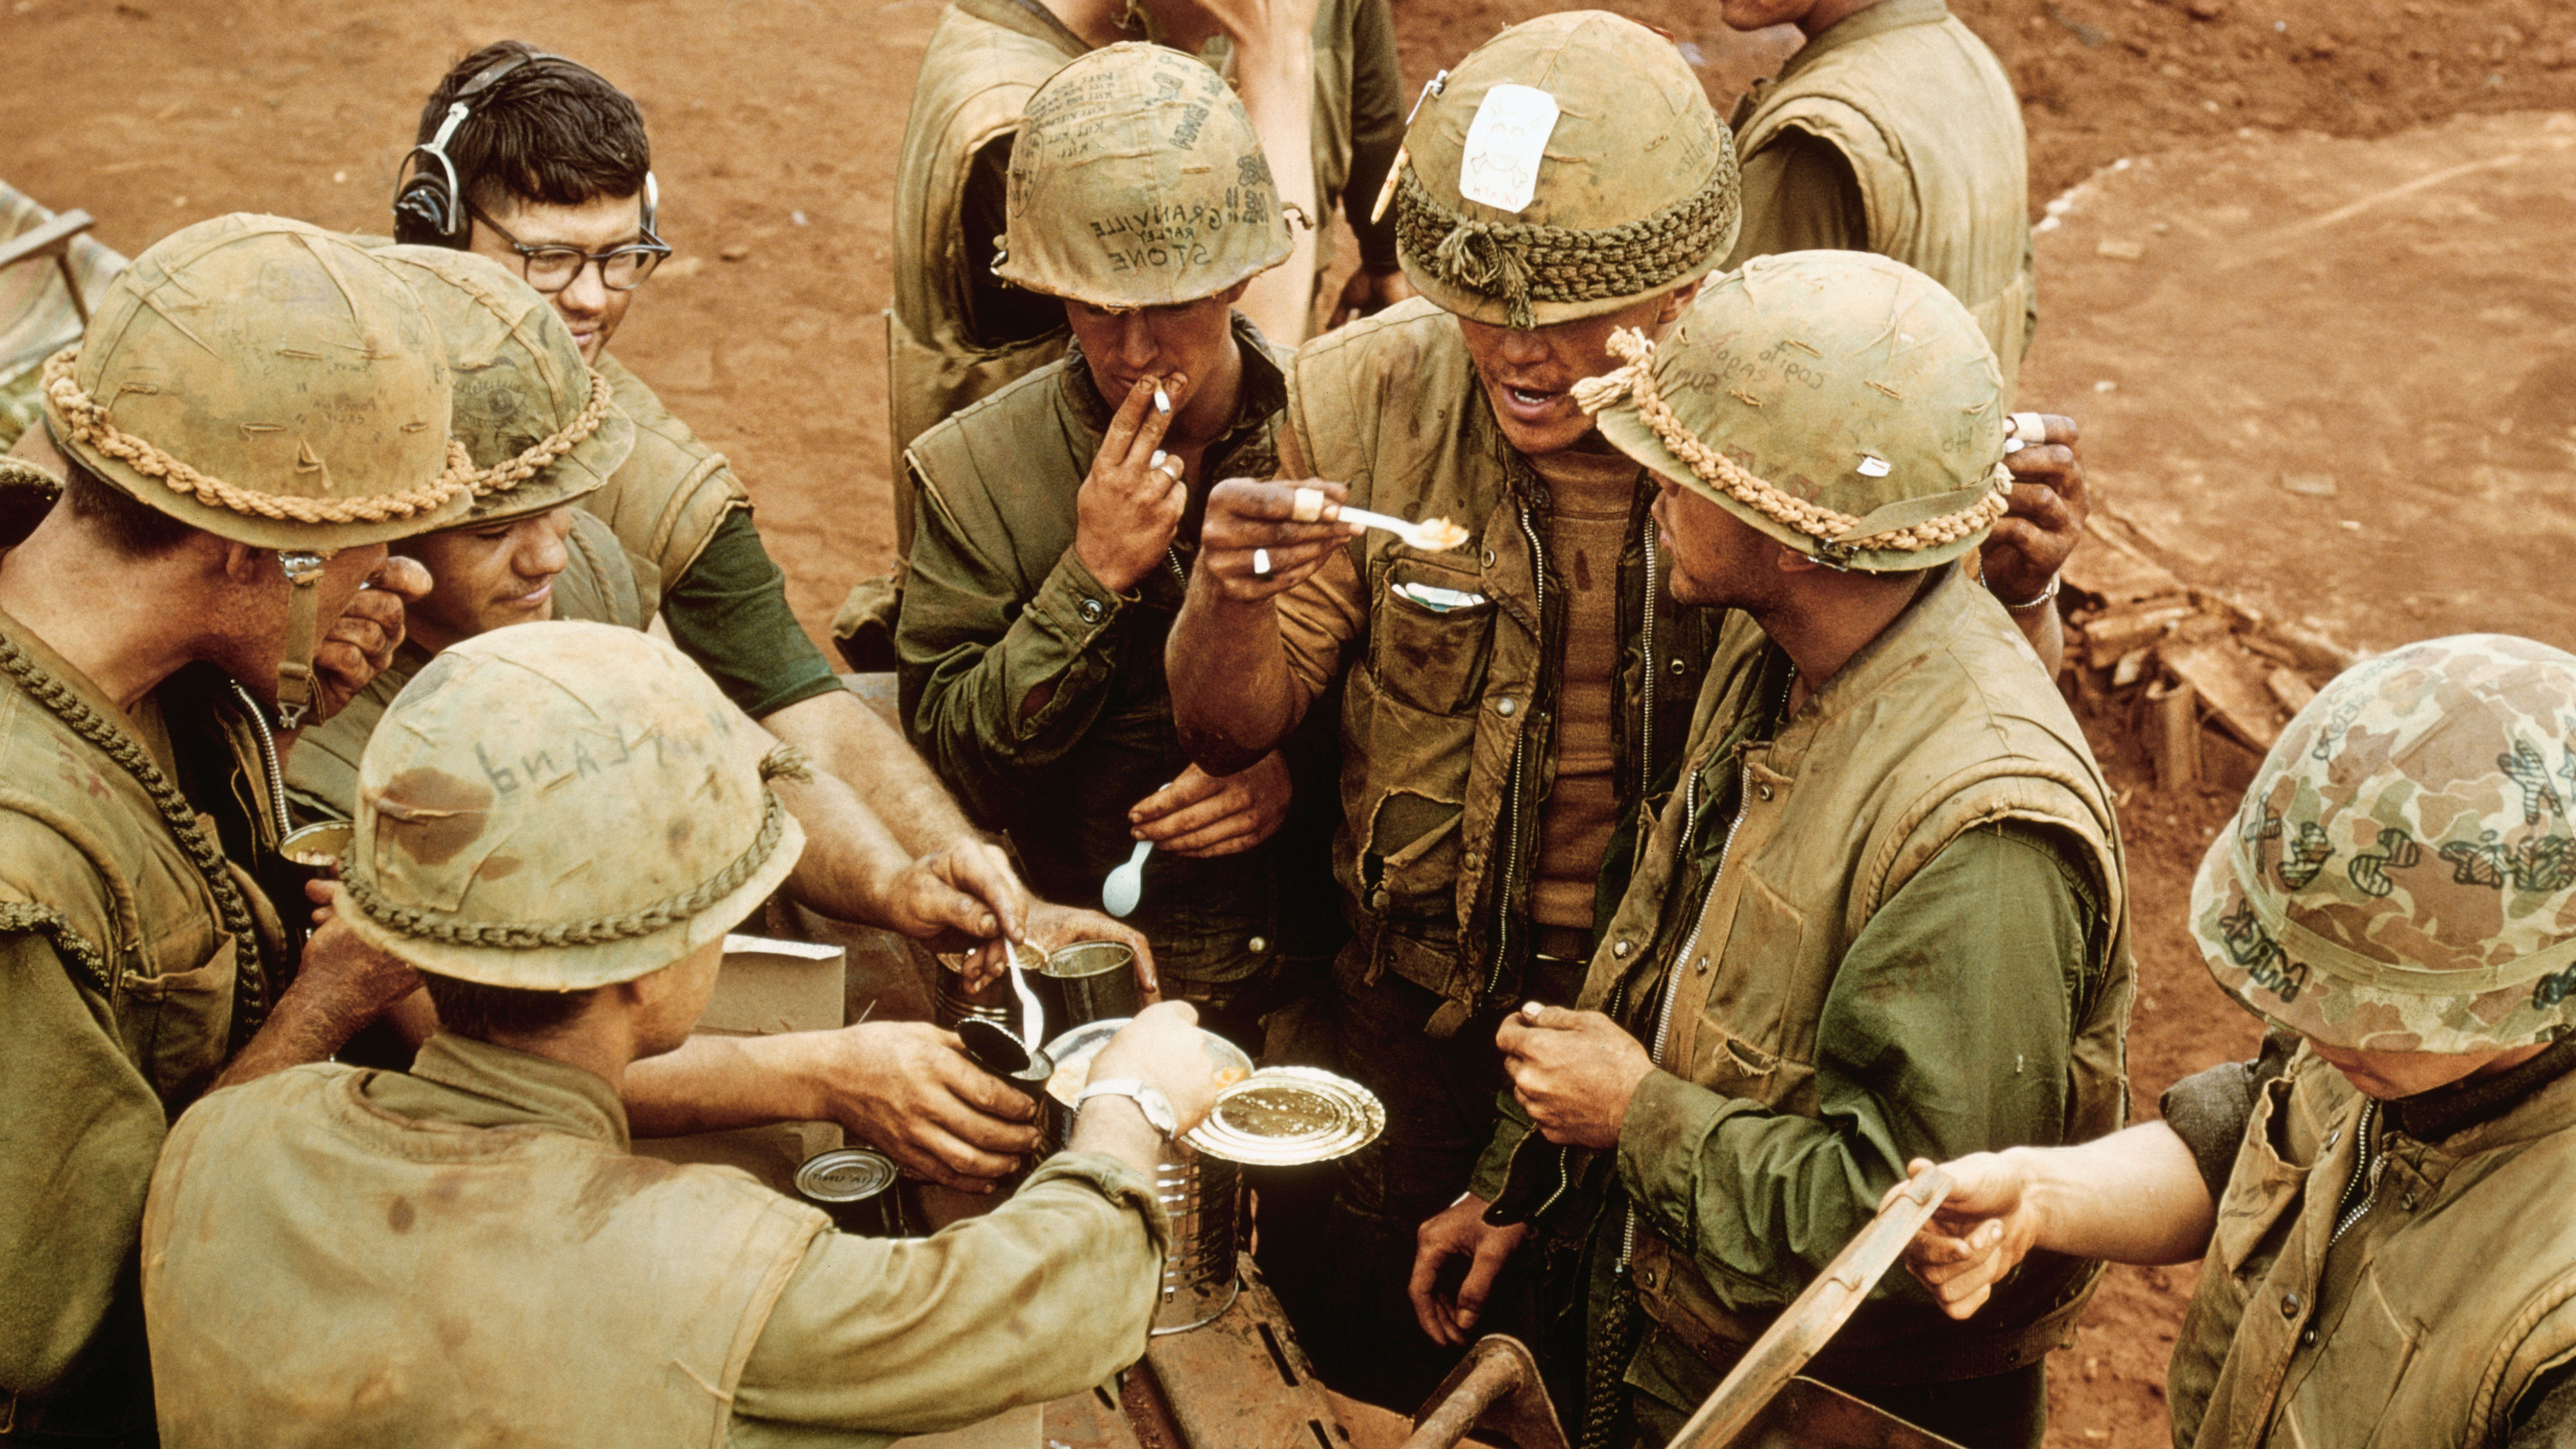 Read More: How Soldier's Rations Went From Live Hogs to Indestructible MREs